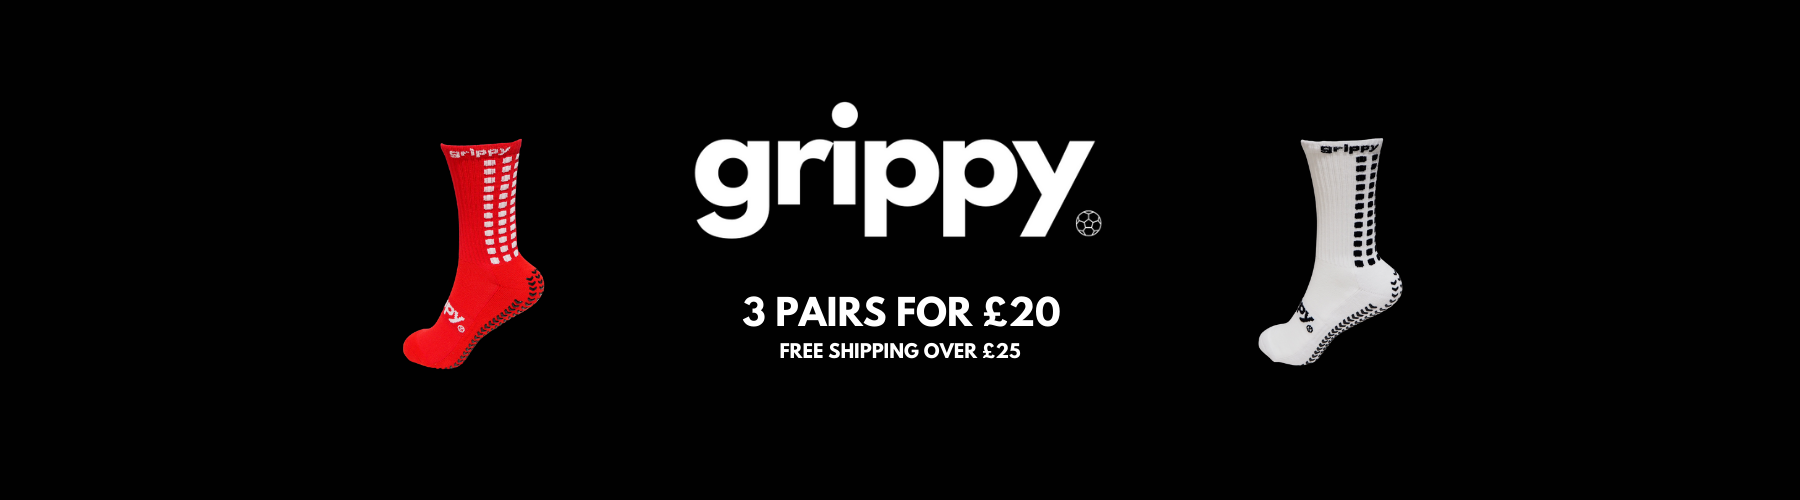 football grip socks offer buy two get one free discount